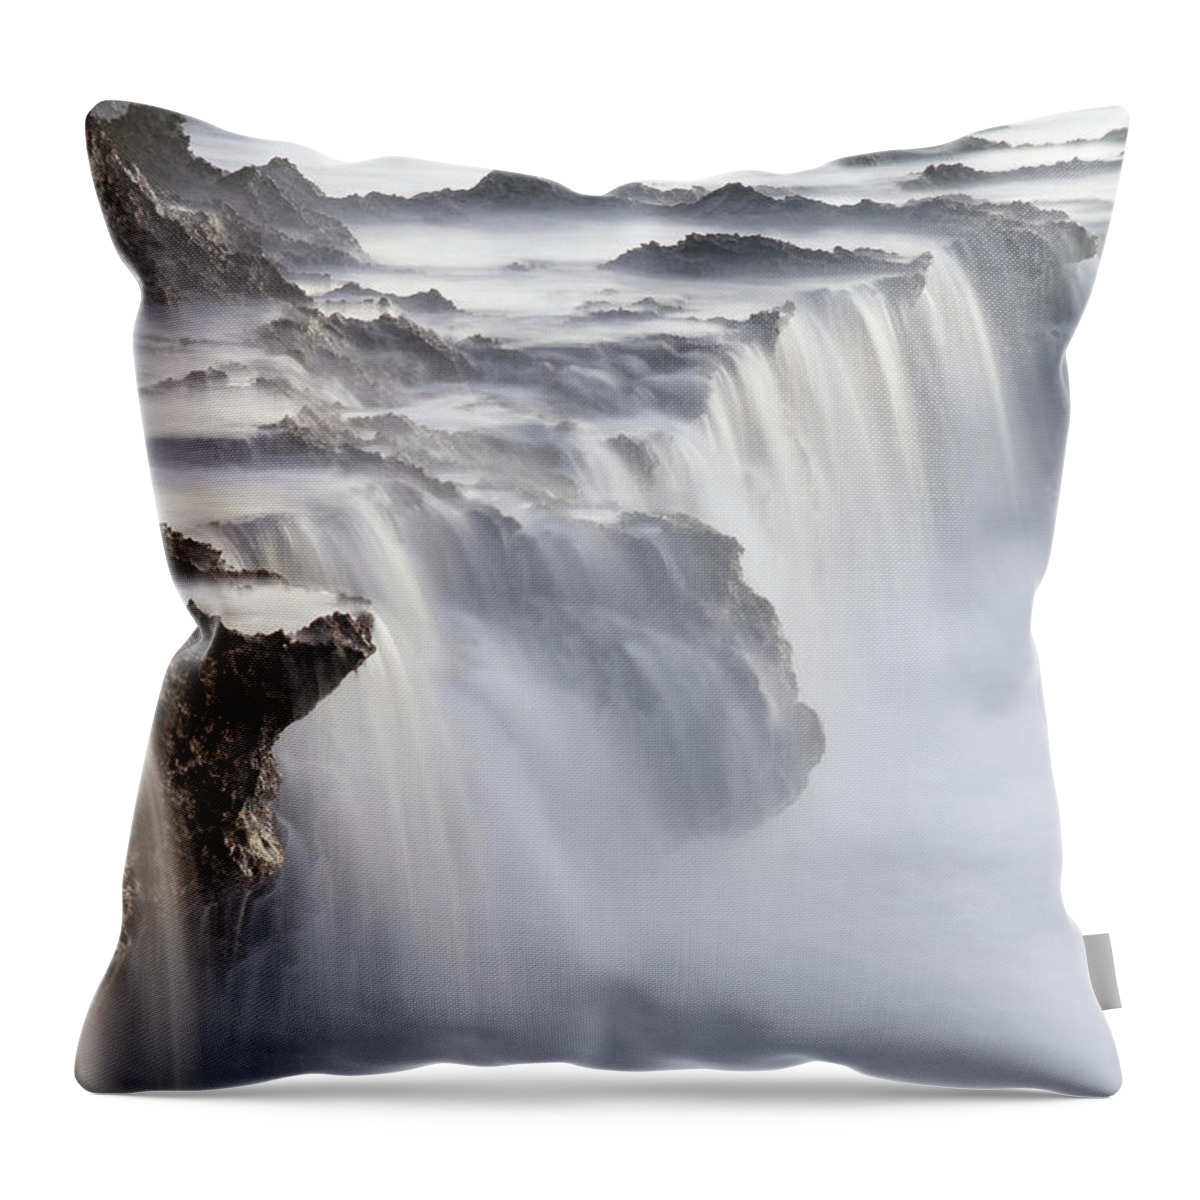 Tranquility Throw Pillow featuring the photograph Oahu North Shore Seascape by (c) Loco Moco Photos